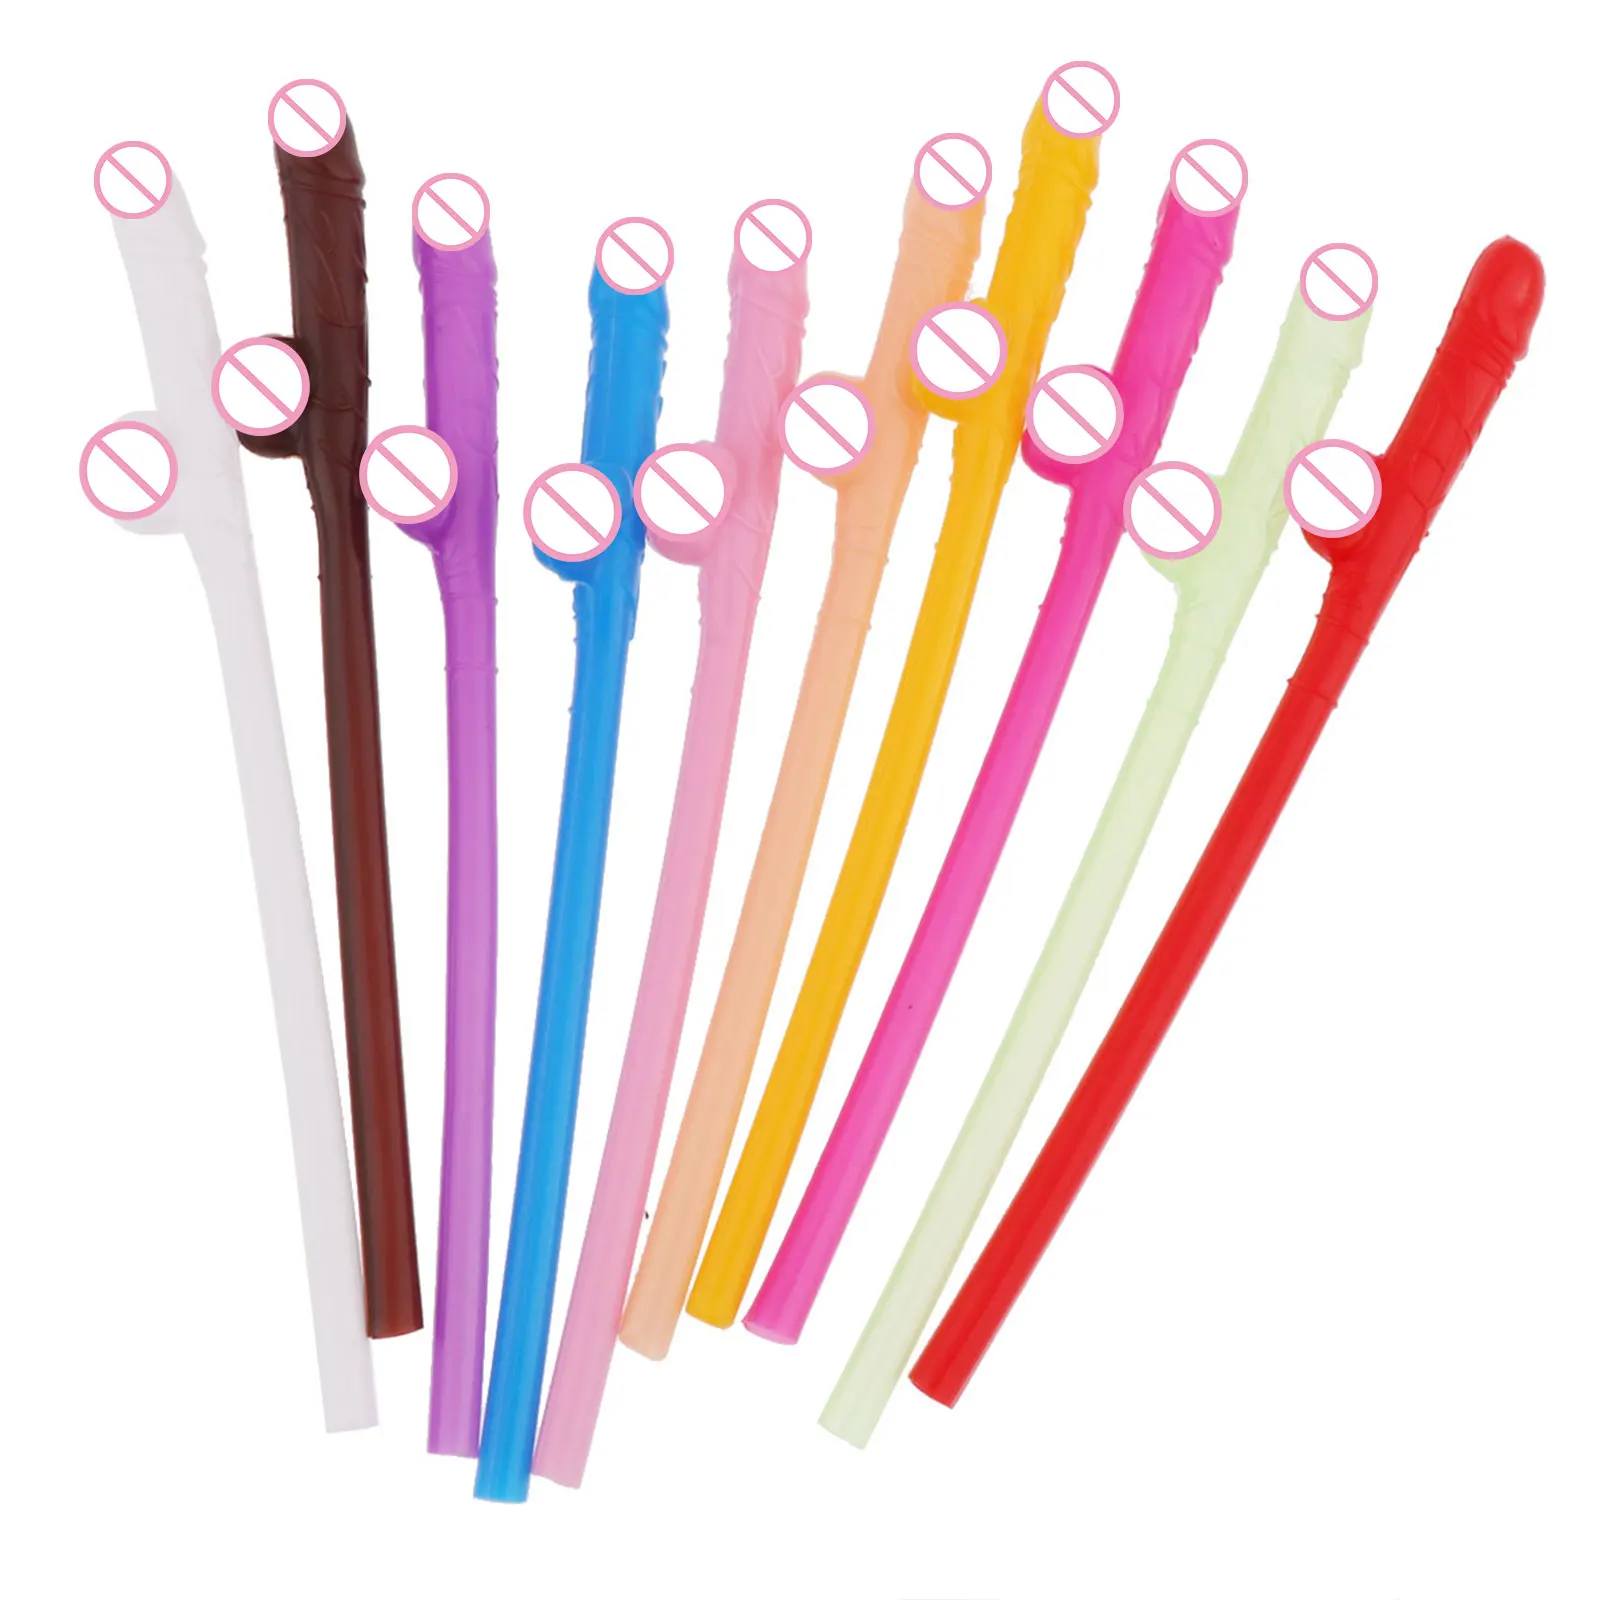 WILLY STRAWS X 8 PACK LADIES HEN PARTY NIGHT NOVELTY DICKY STRAW ACCESSORY 